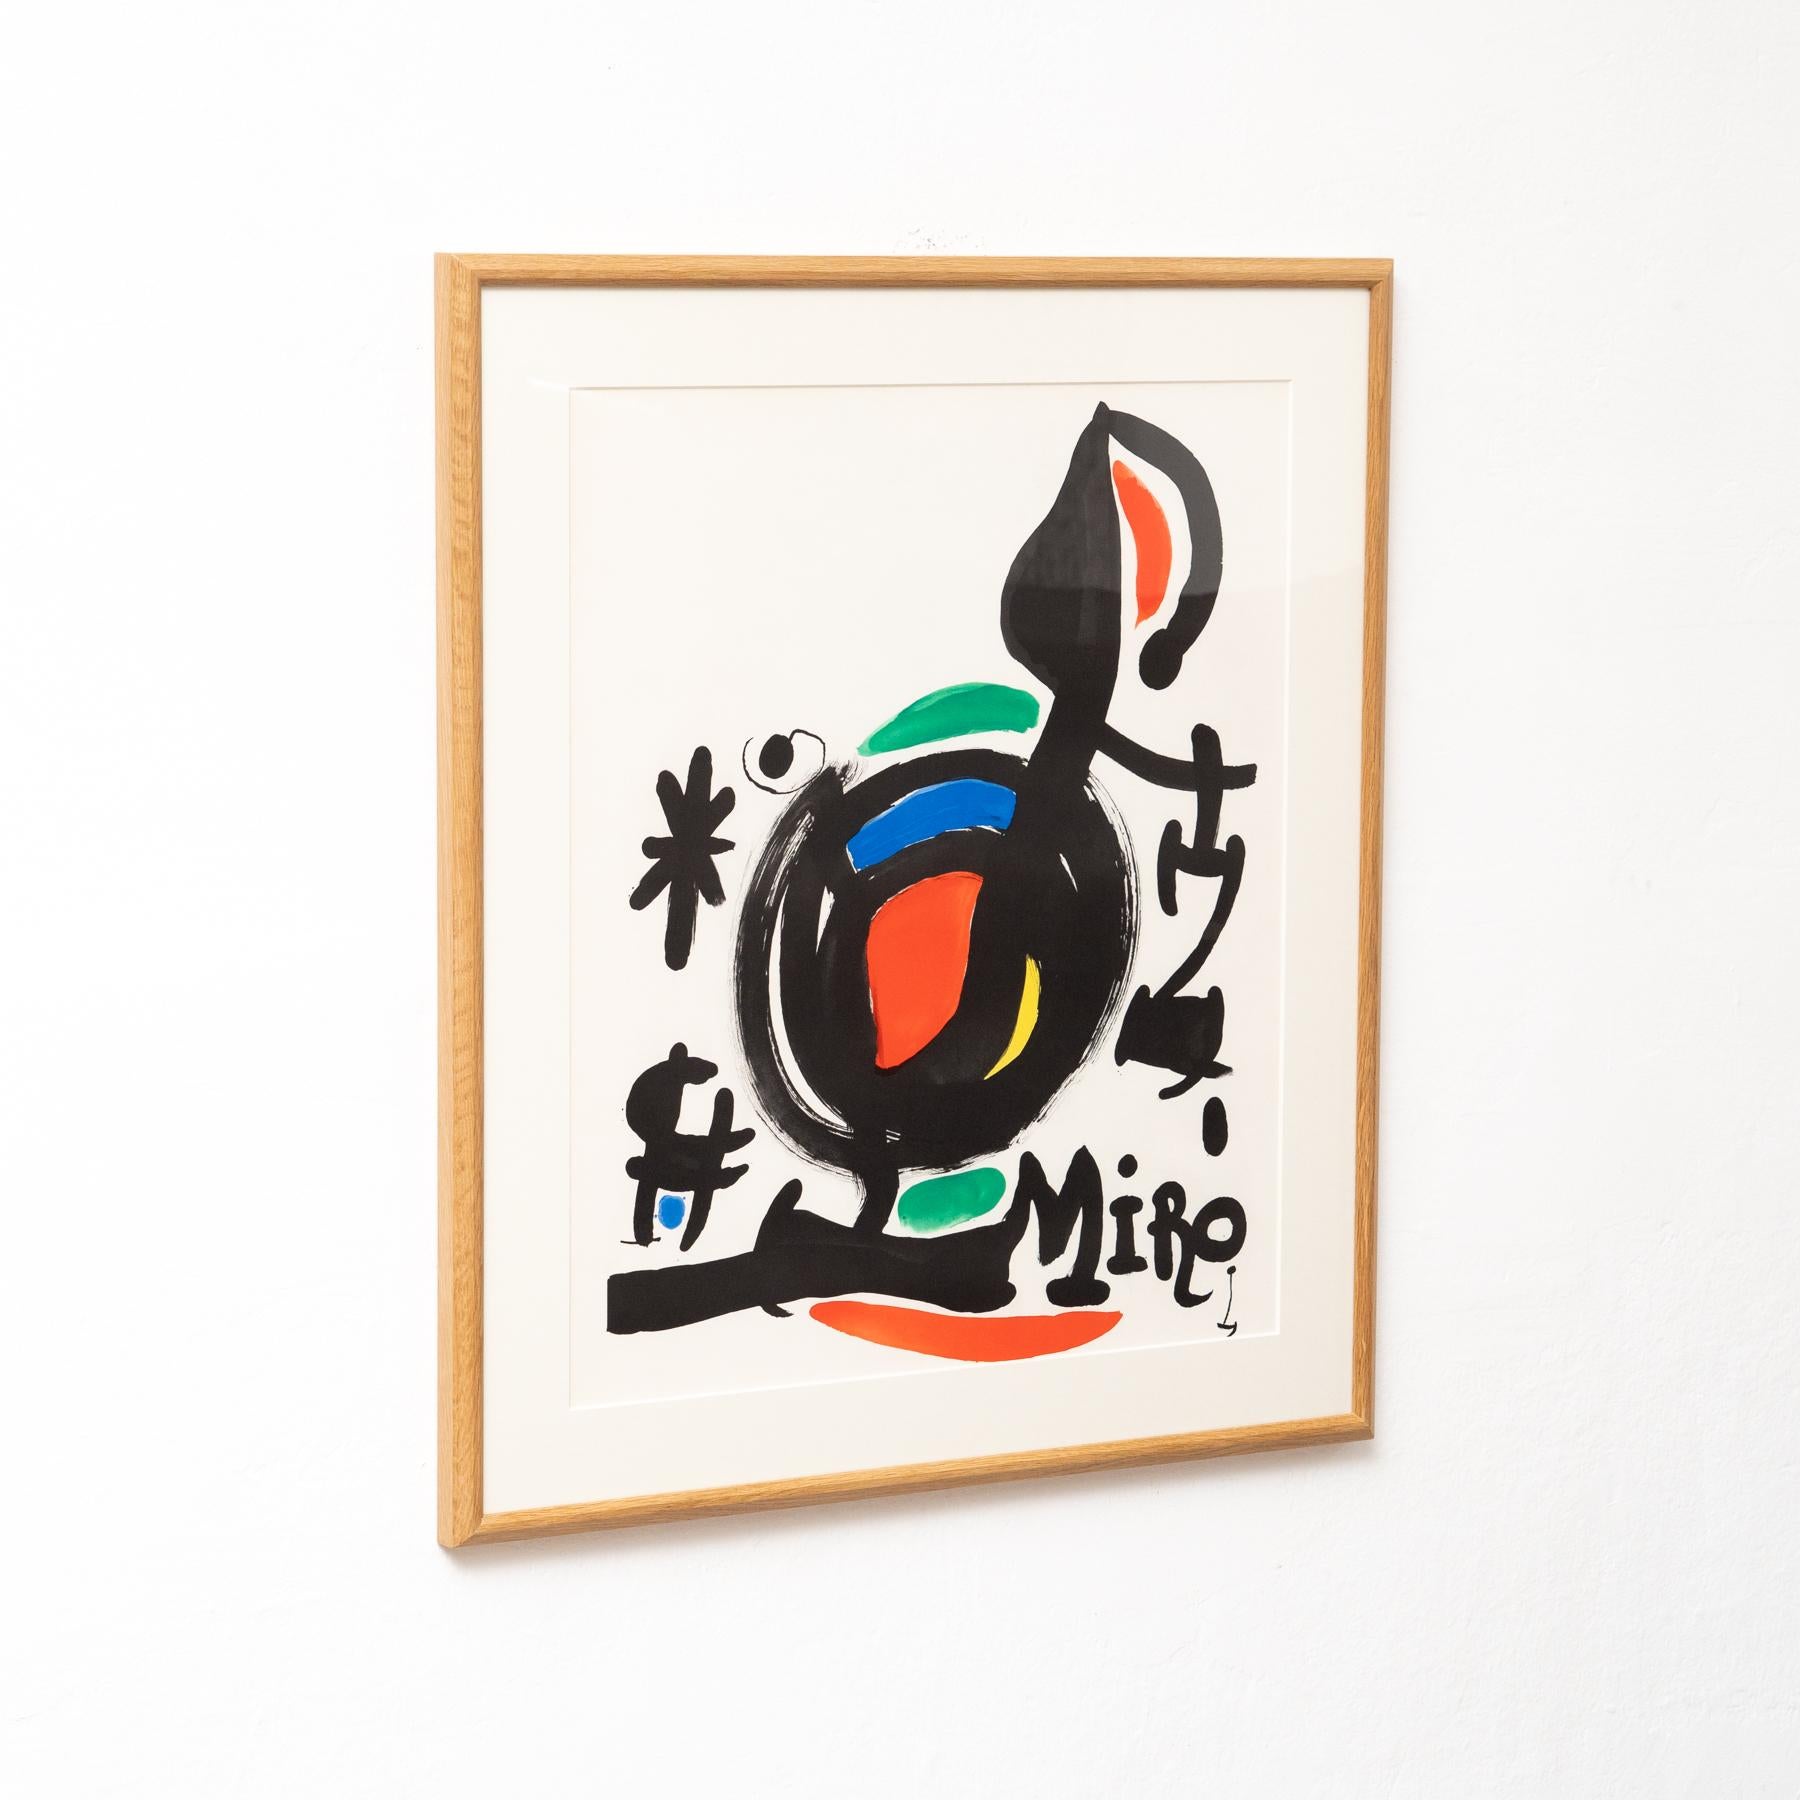 Spanish  High Quality Fine Art Color Framed Lithography by Joan Miró, circa 1960. For Sale